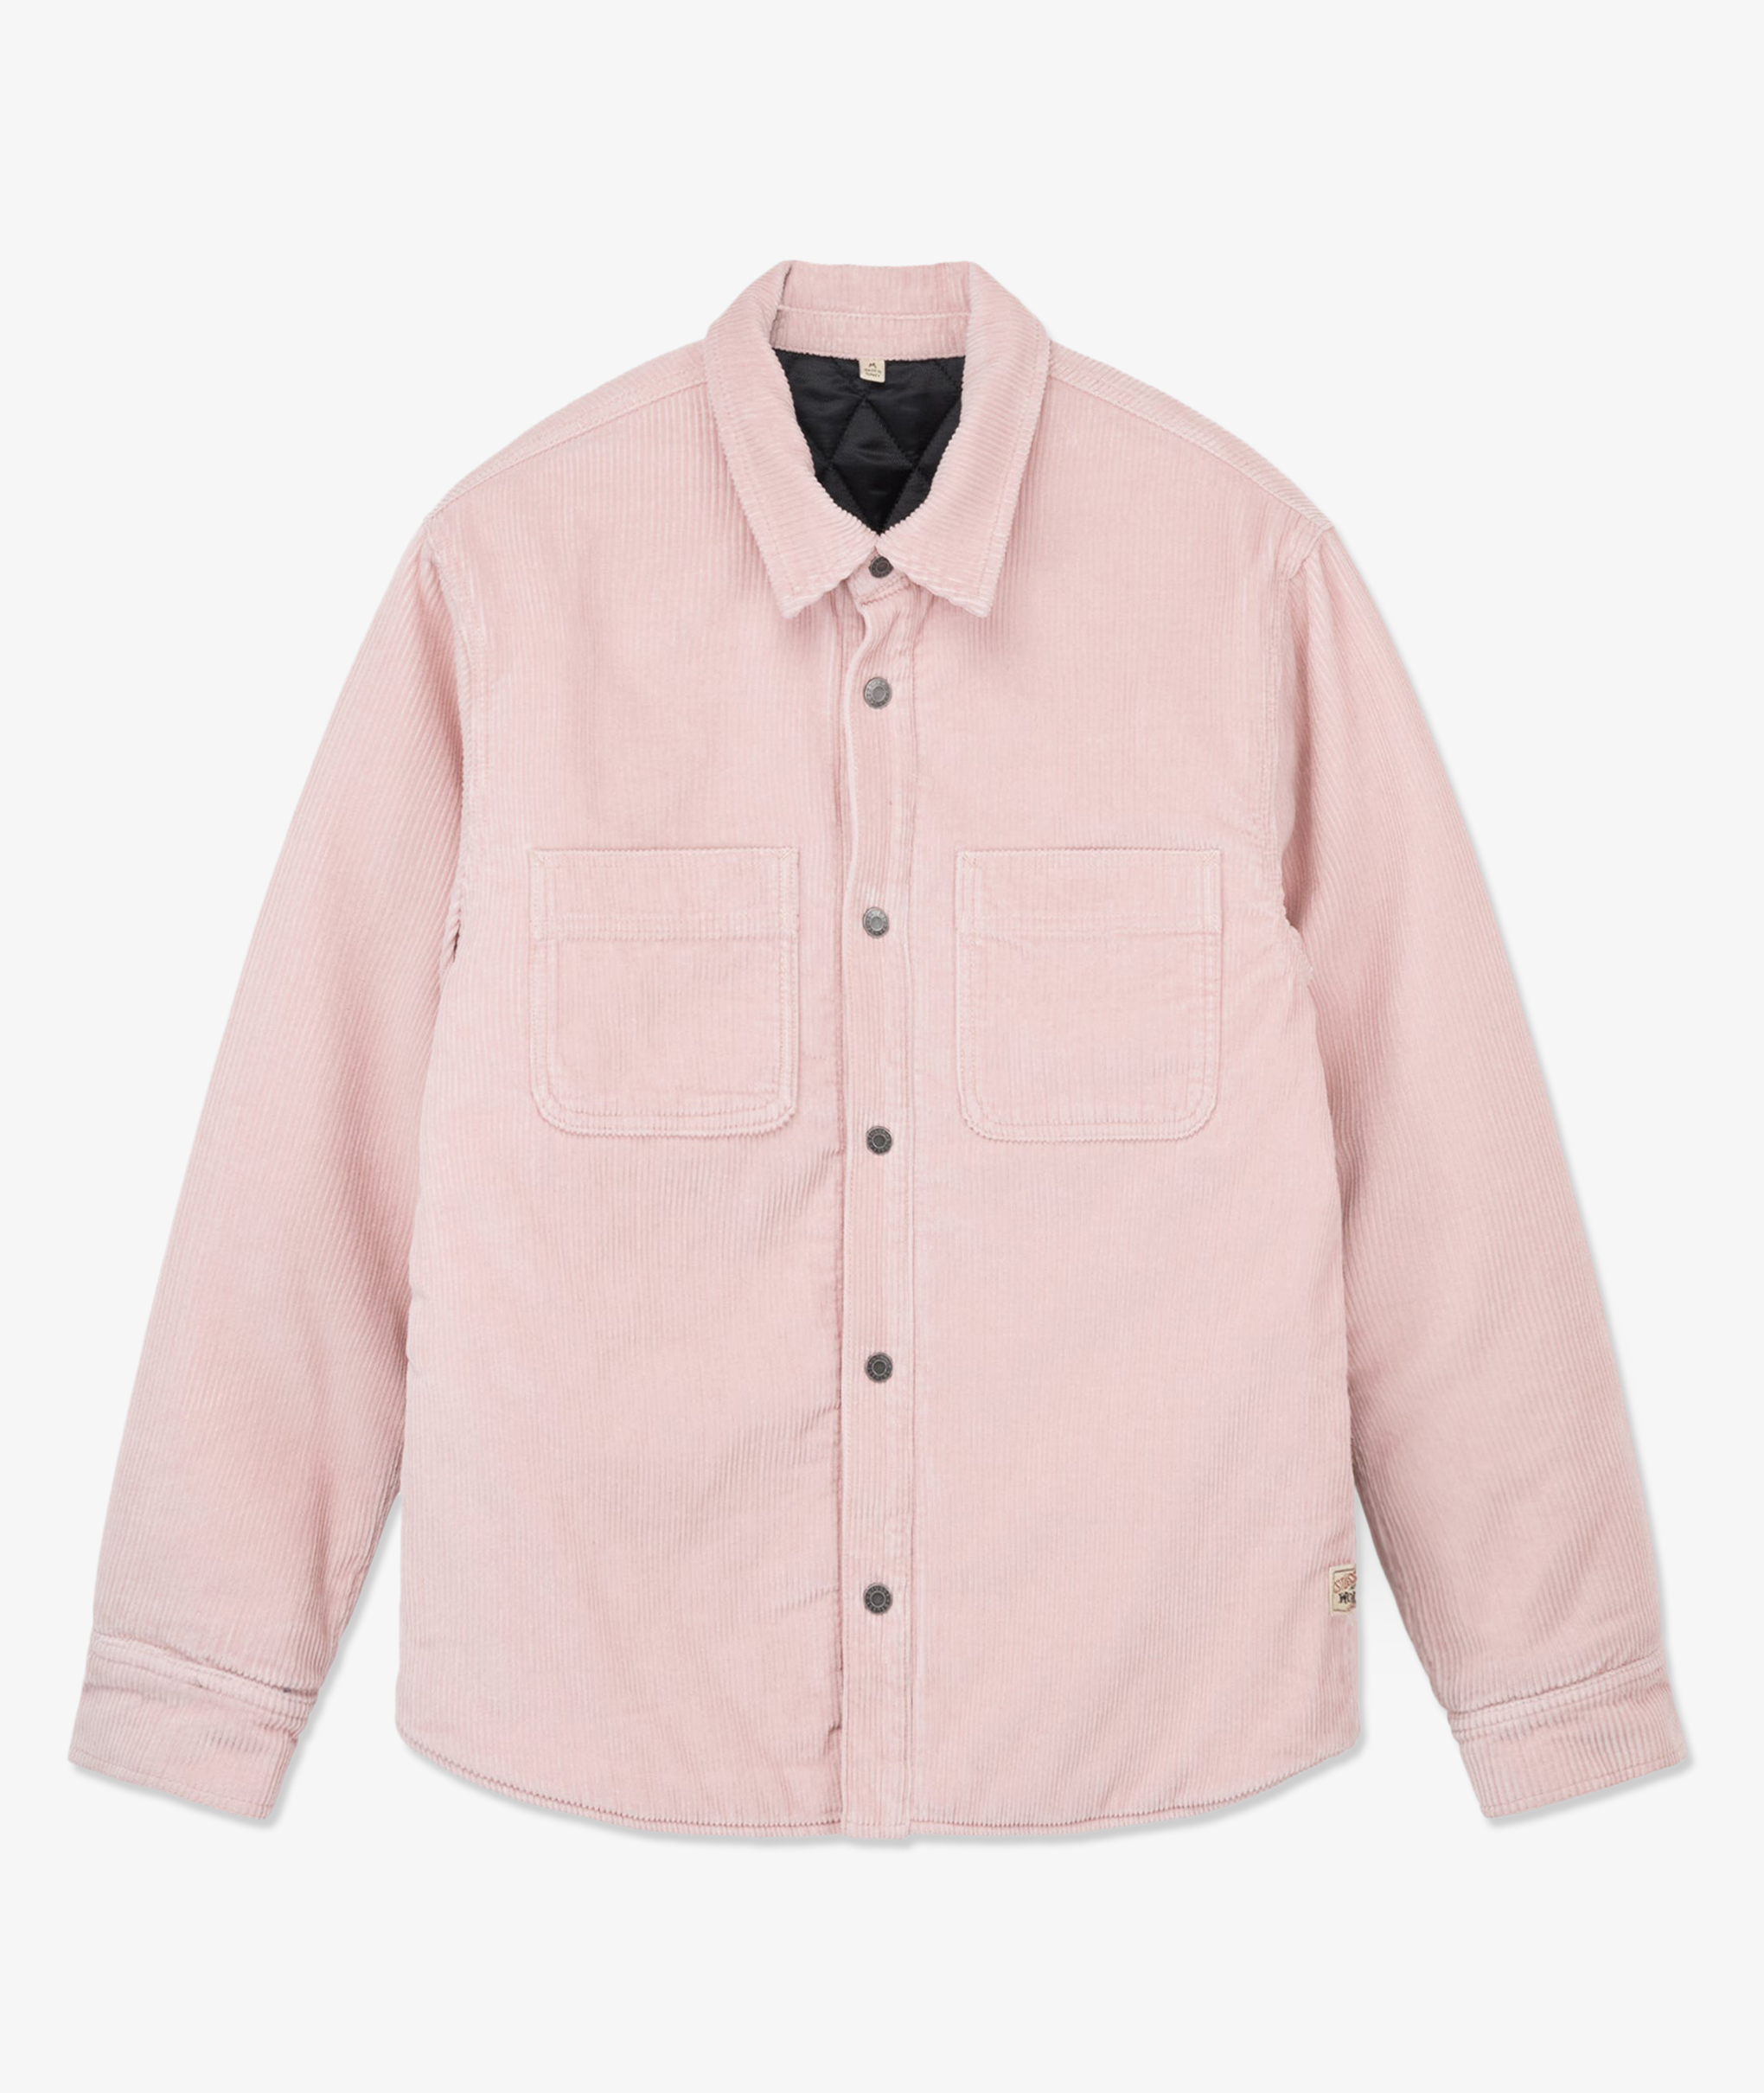 Norse Store | Shipping Worldwide - Stüssy Cord Quilted Overshirt ...